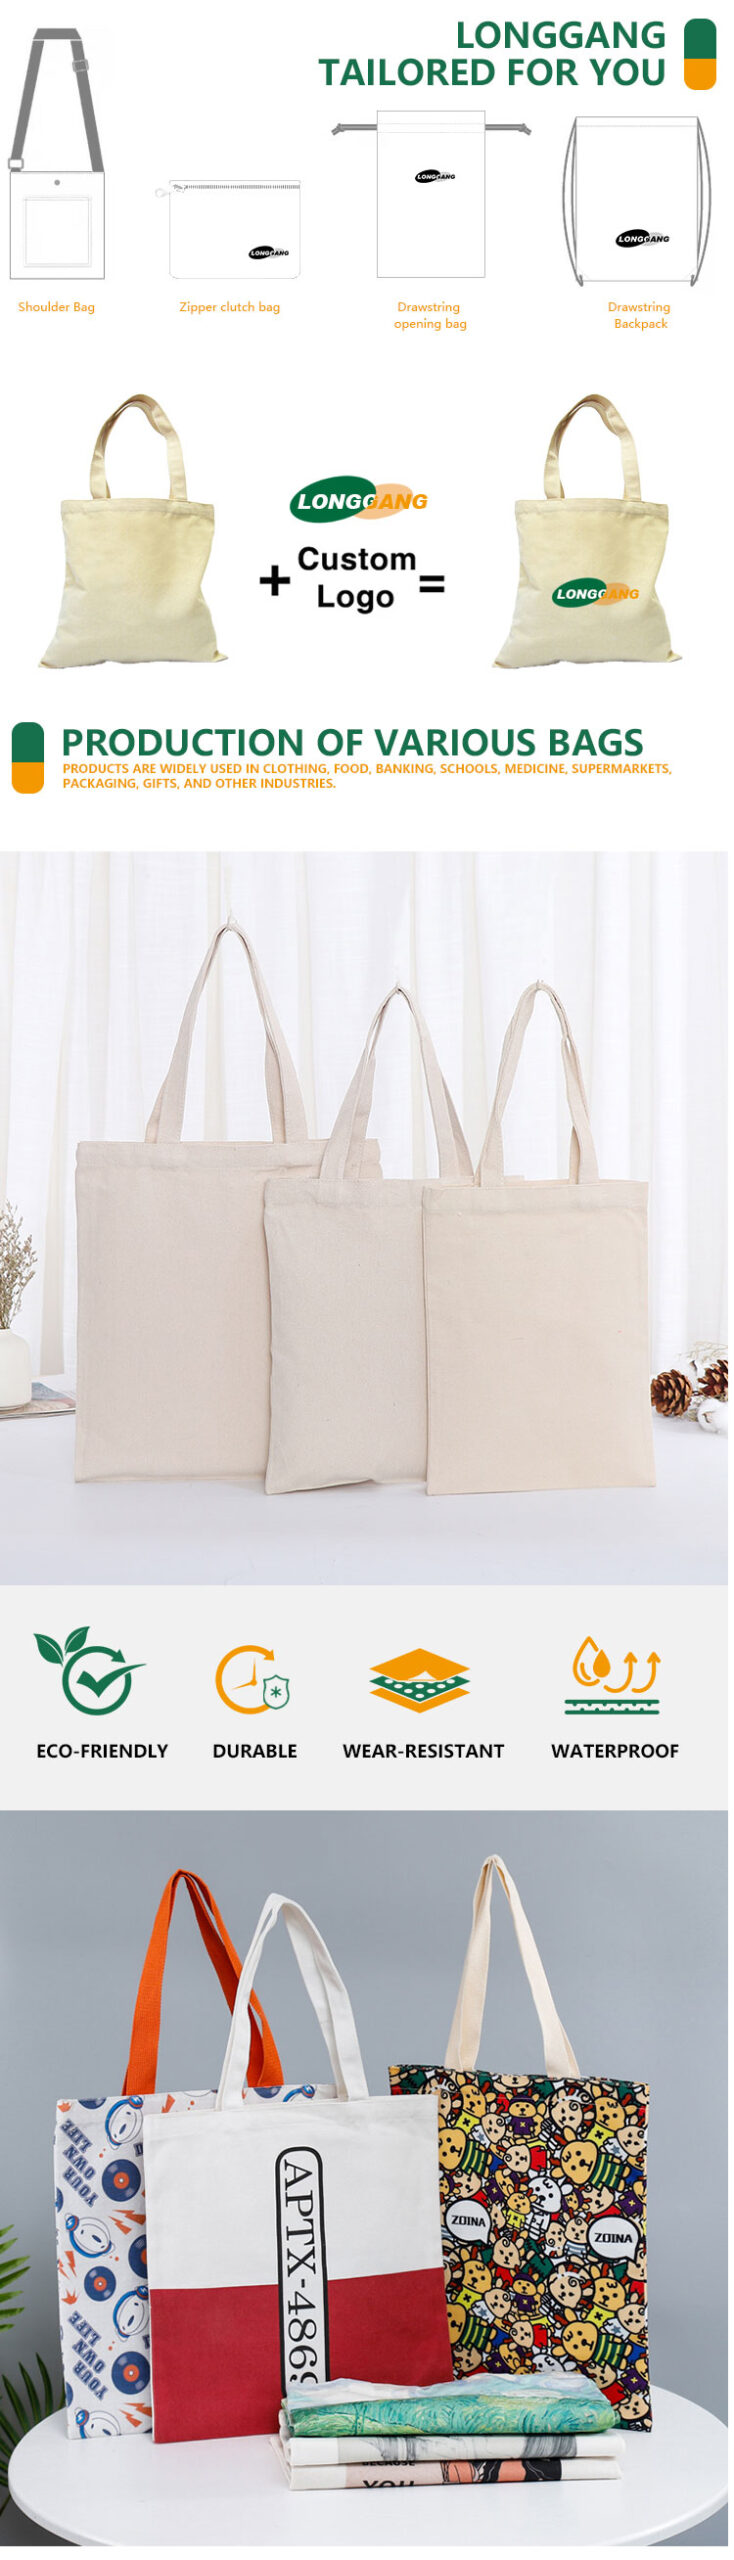 canvas tote bags with zipper